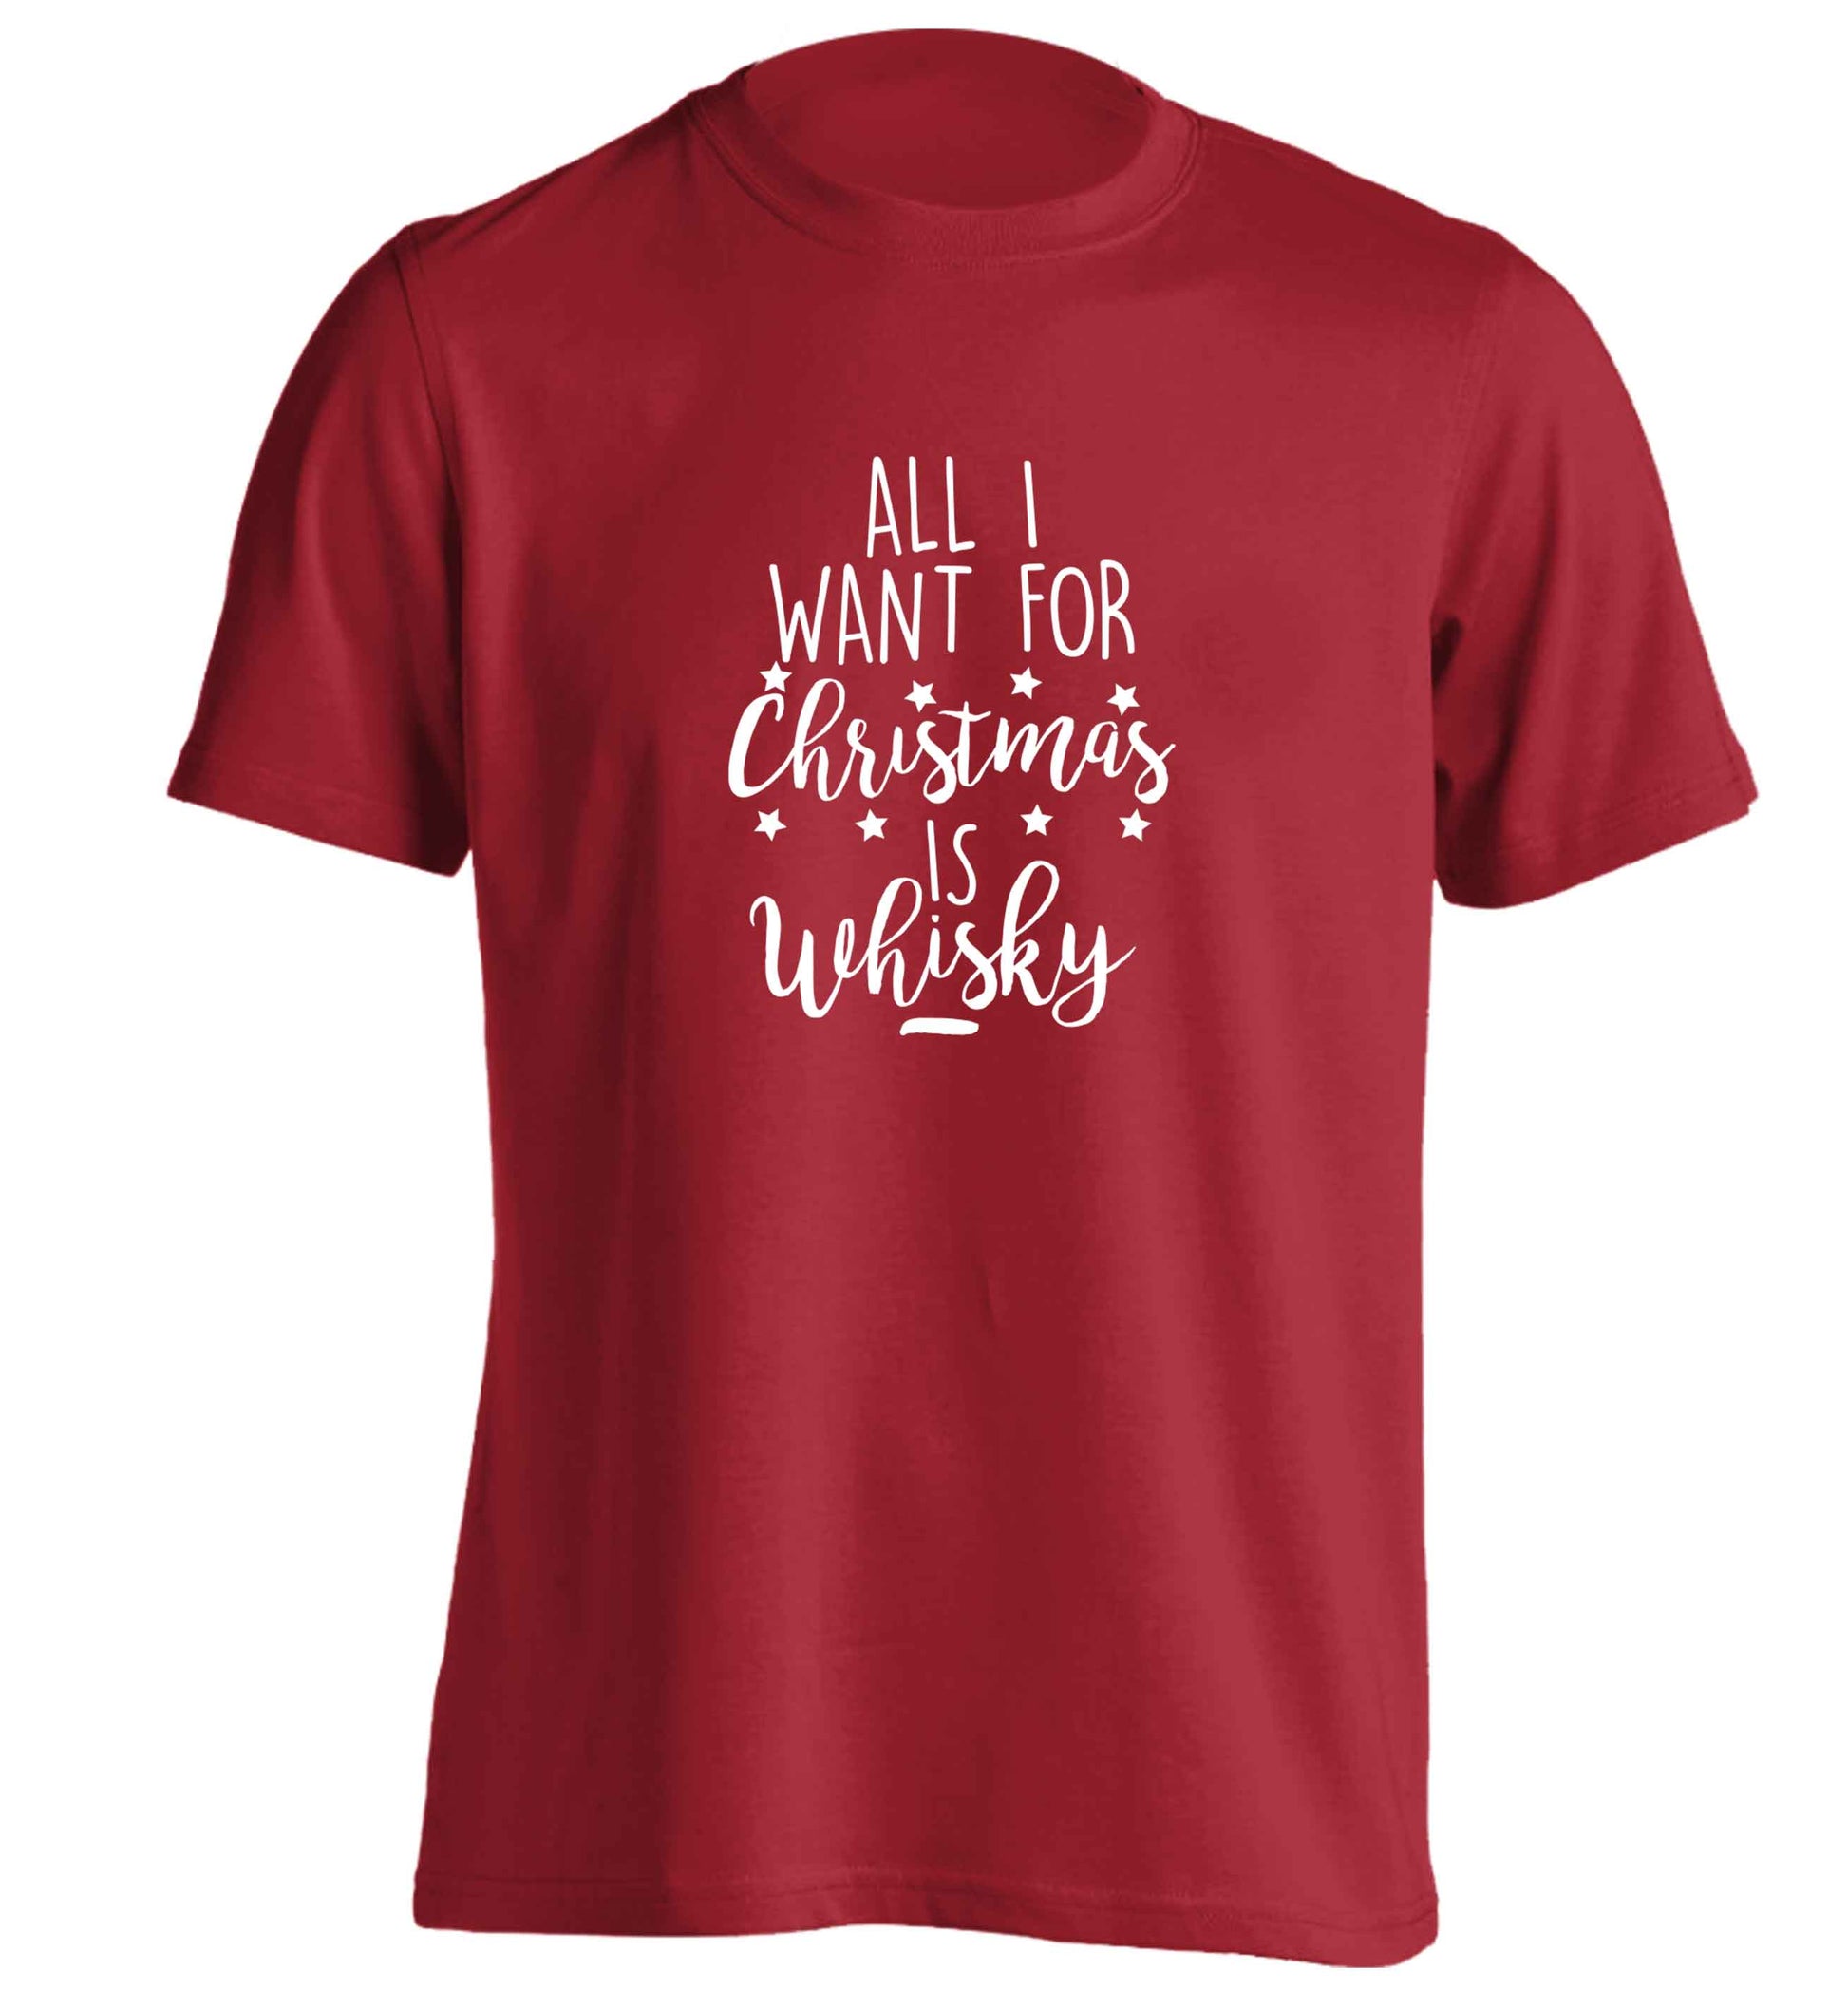 All I want for Christmas is whisky adults unisex red Tshirt 2XL